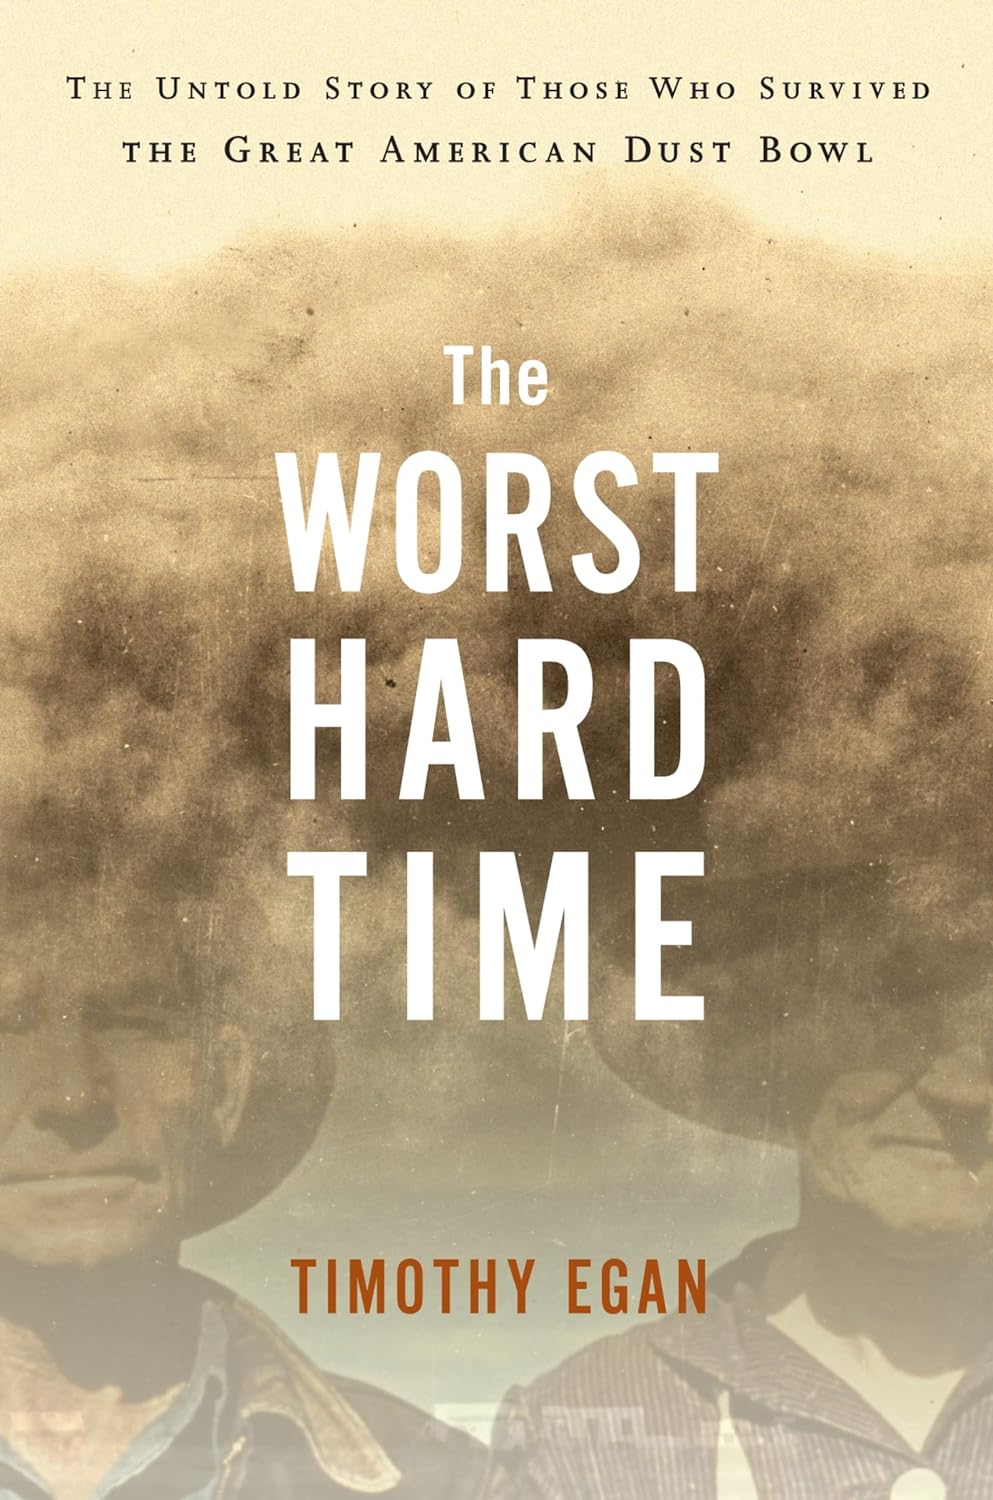 The Worst Hard Time. The Untold Story of Those Who Survived the Great American Dust Bowl. By Timothy Egan.